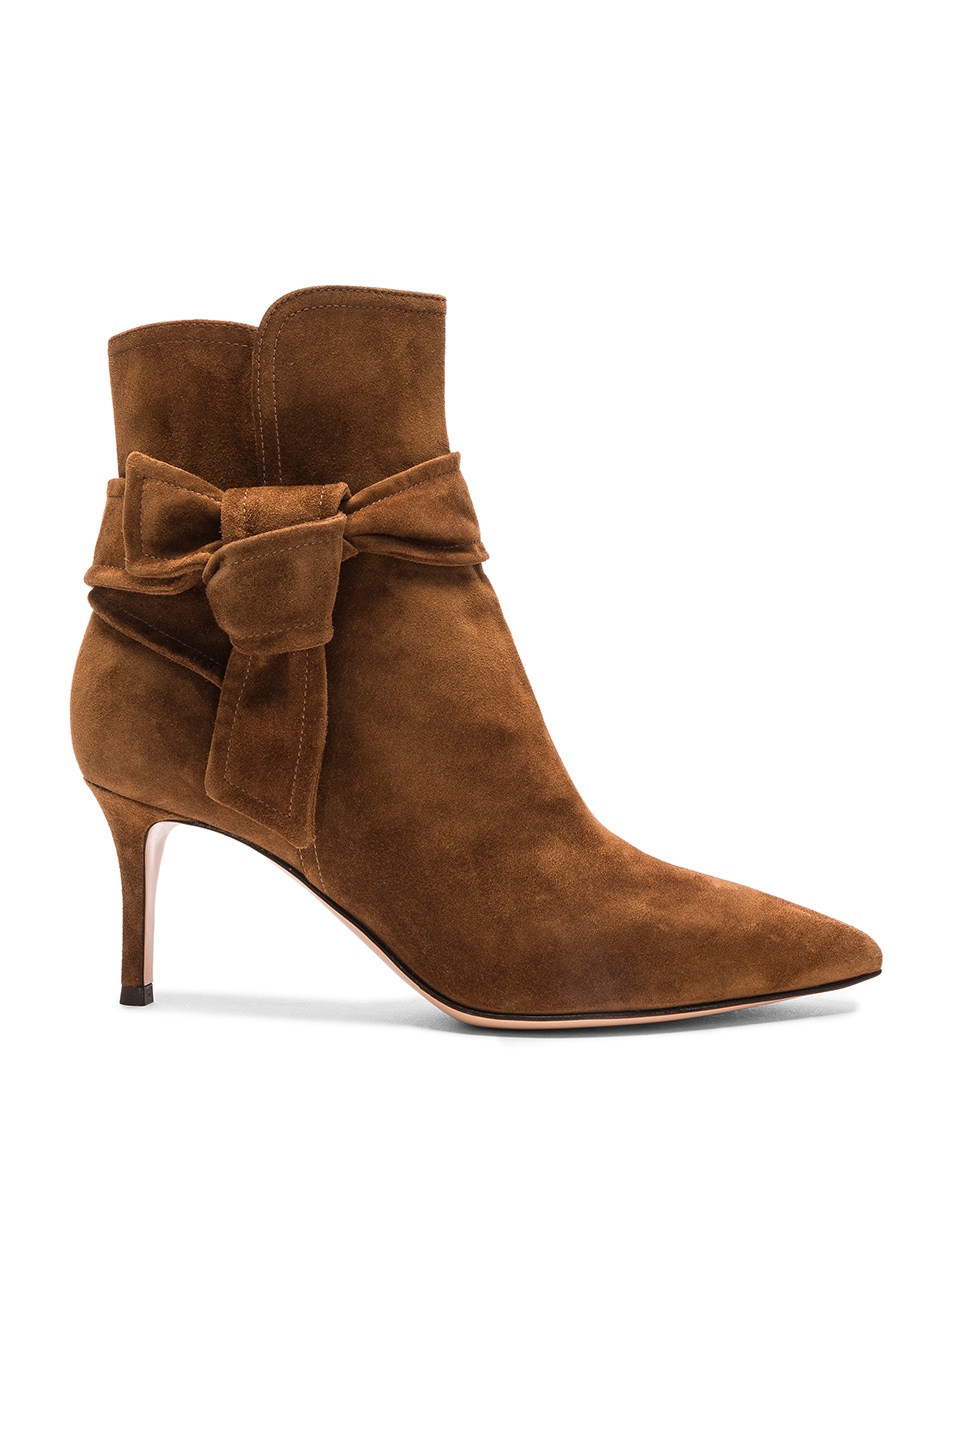 Image 1 of Gianvito Rossi Suede Bow Booties in Texas